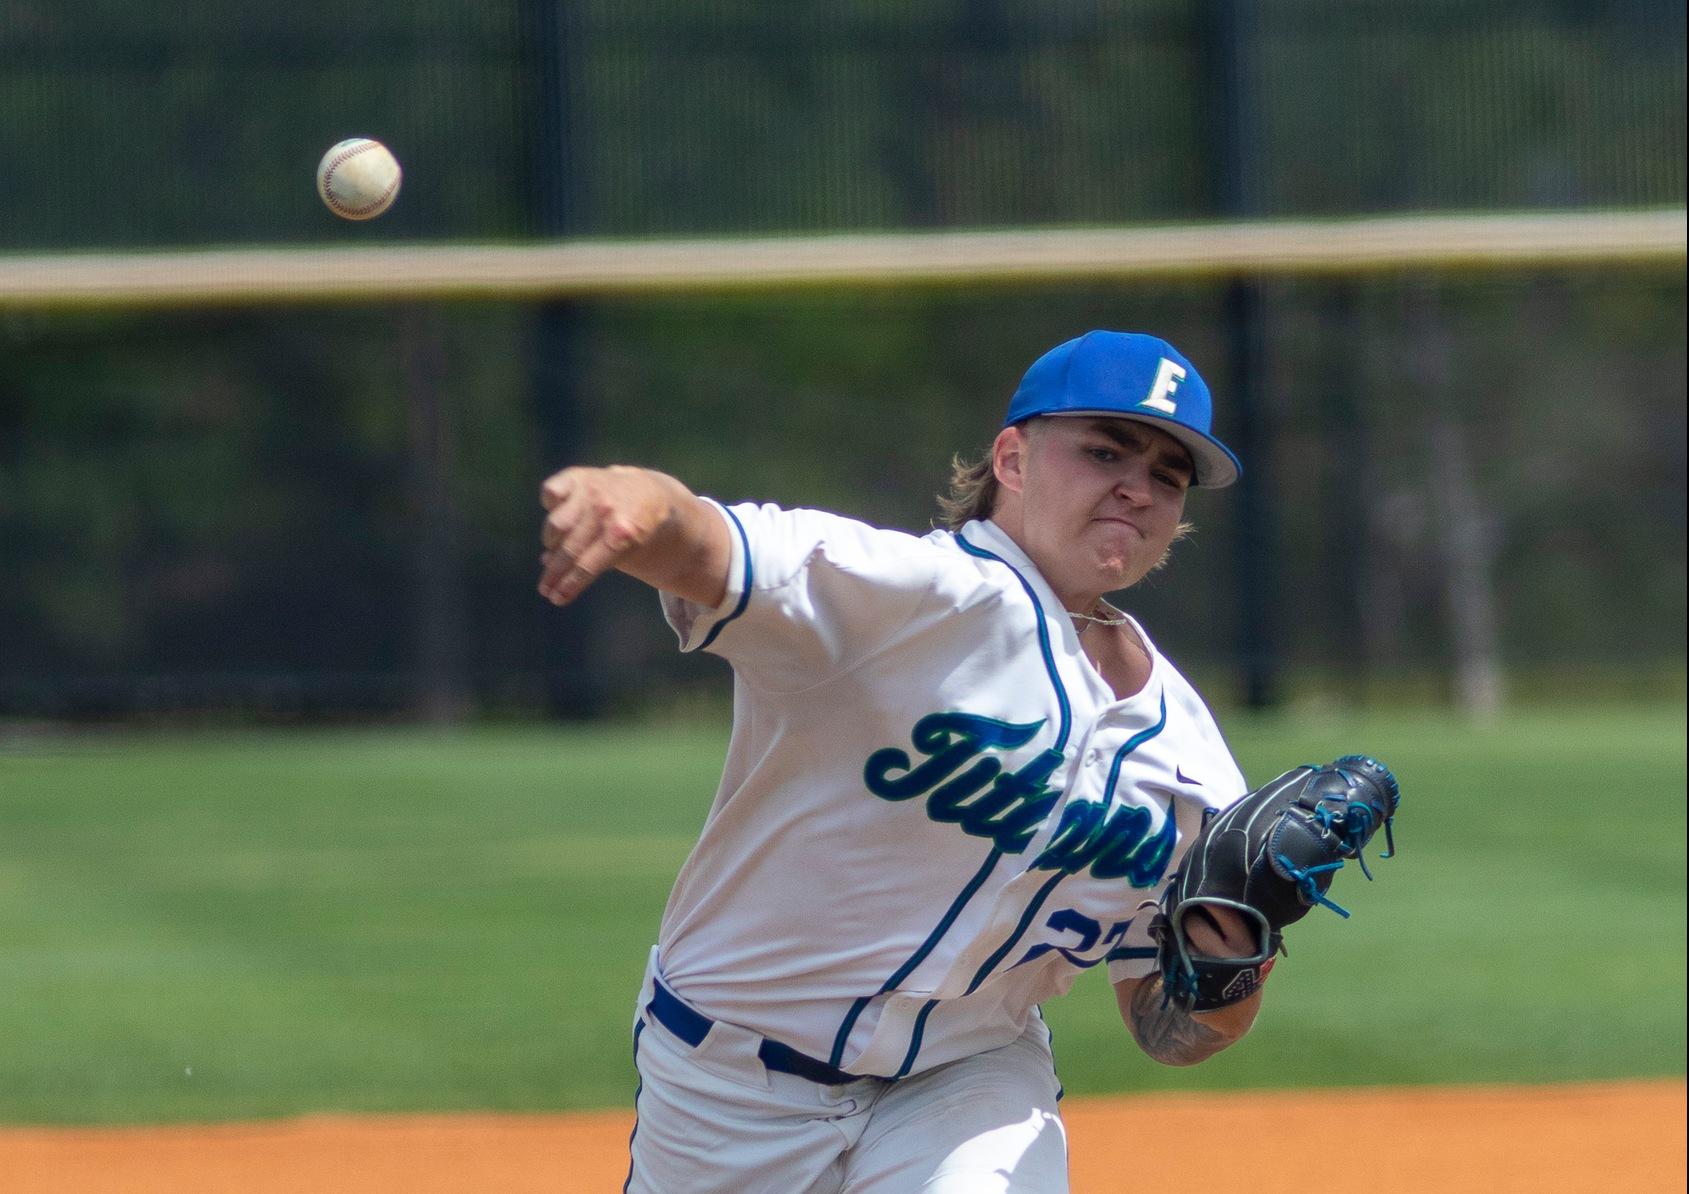 Pitcher Kenneth Robinson named to the All-FCSAA Second Team